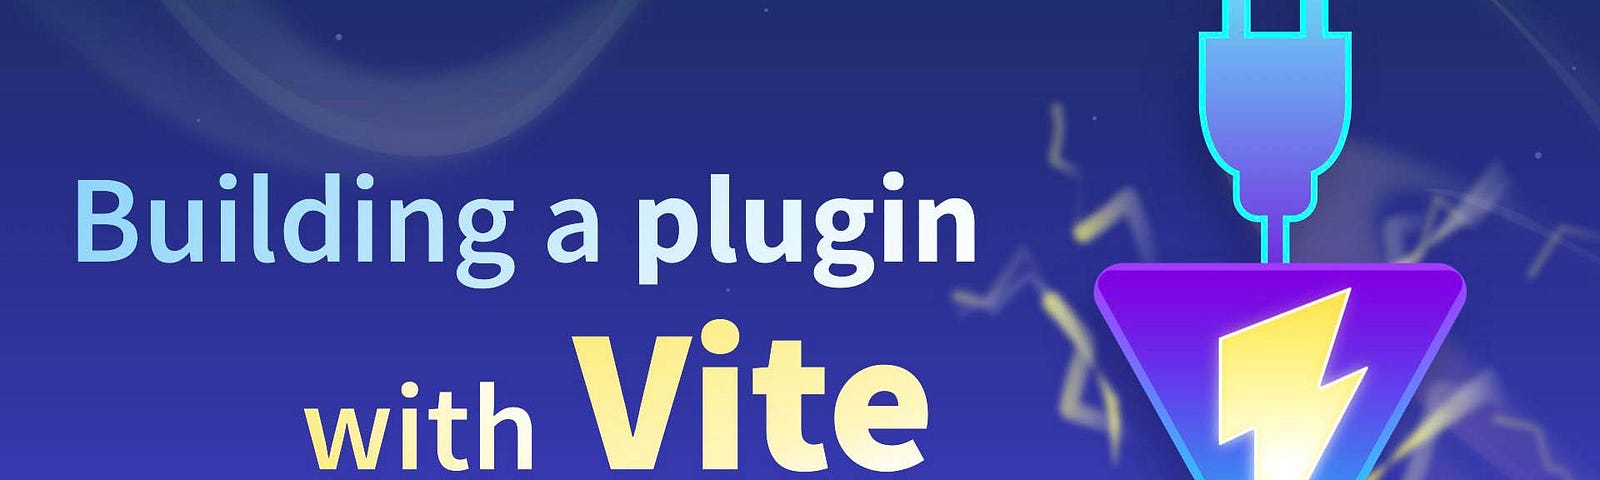 Building a plugin with Vite